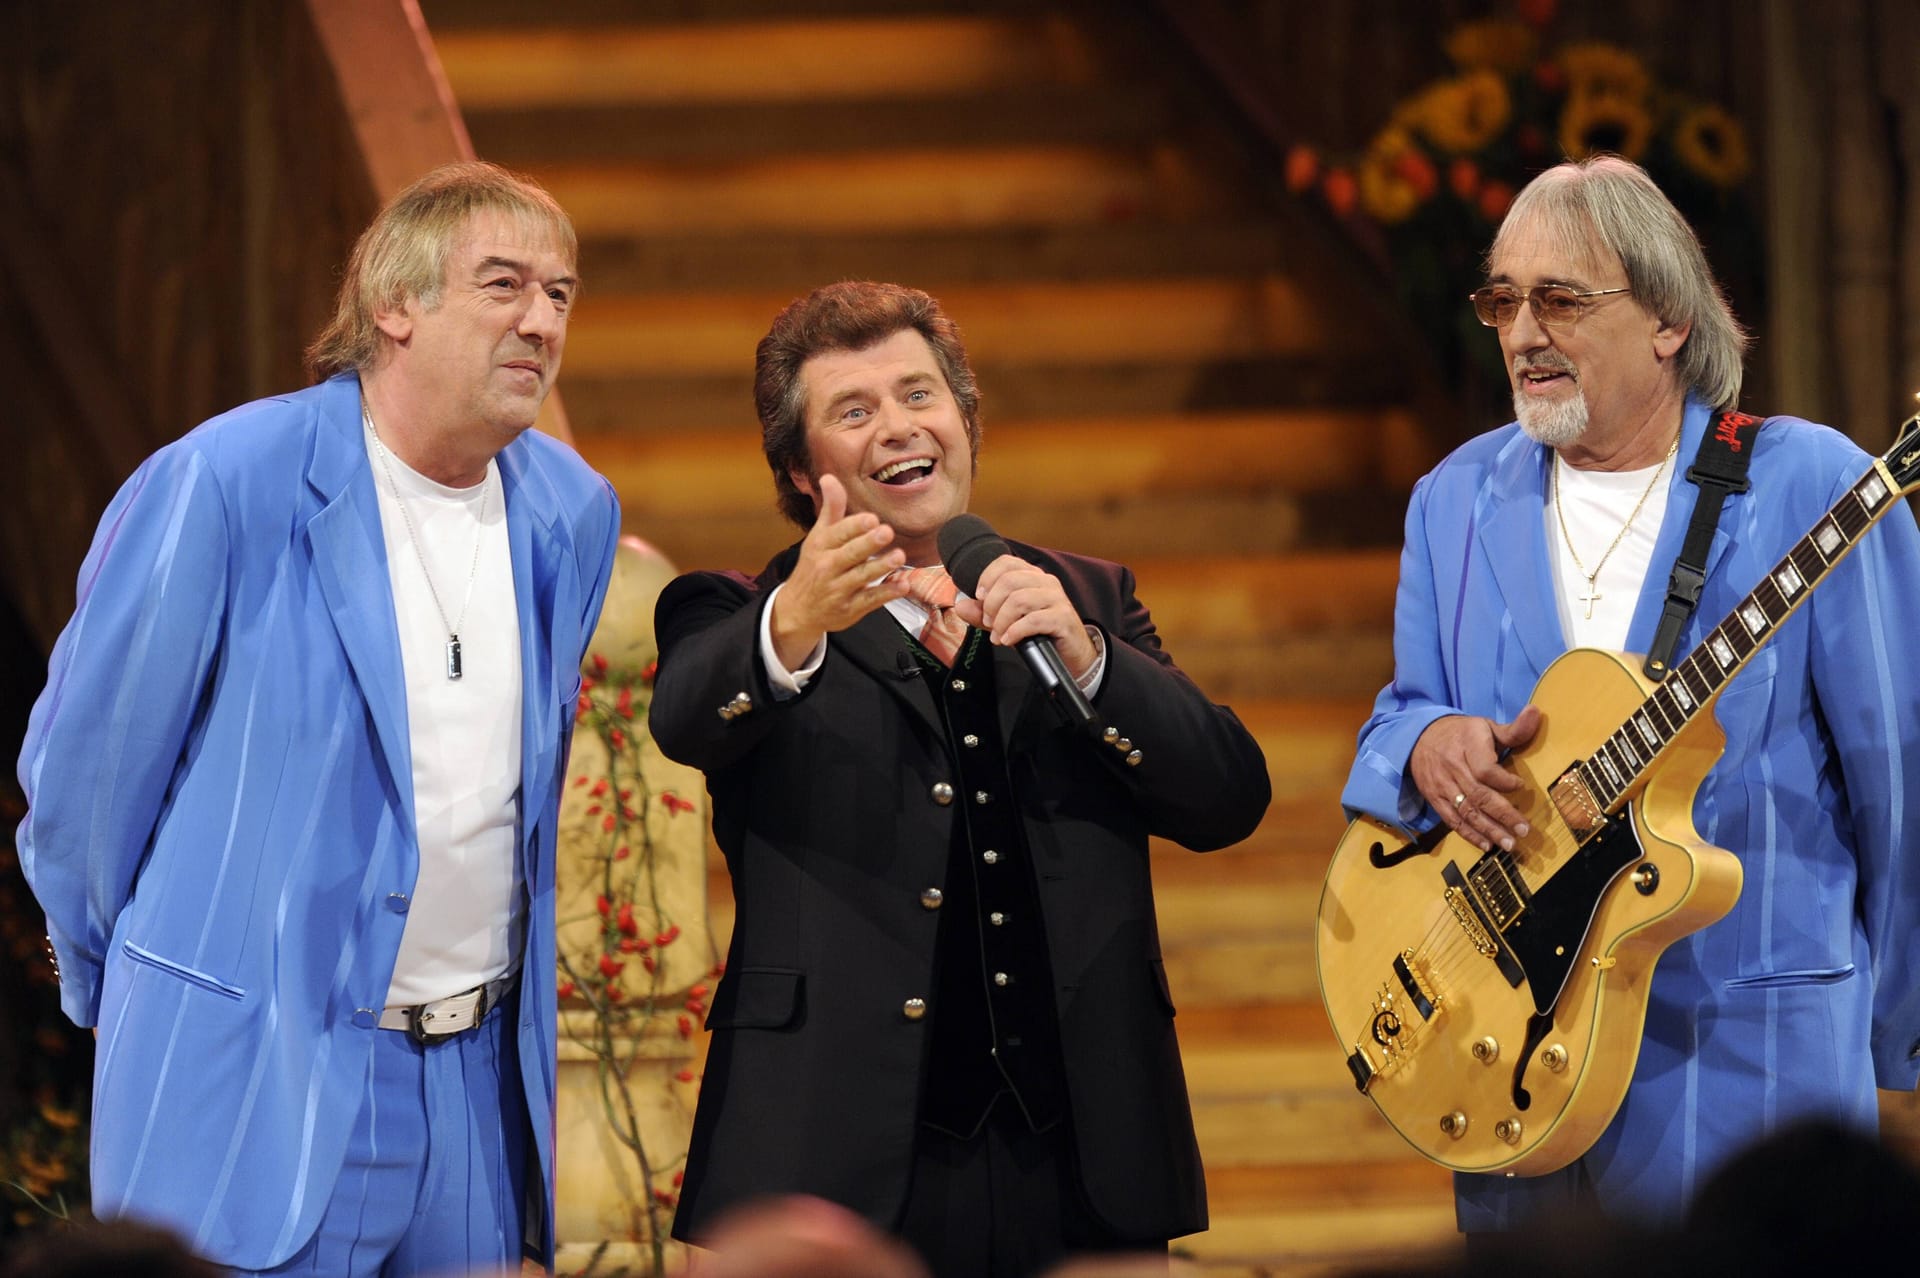 Moderator Andy Borg (centre) with the Amigos stars Bernd Ulrich (l.) and Karl Heinz Ulrich (r.) in 2008 in the "Musikantenstadl".